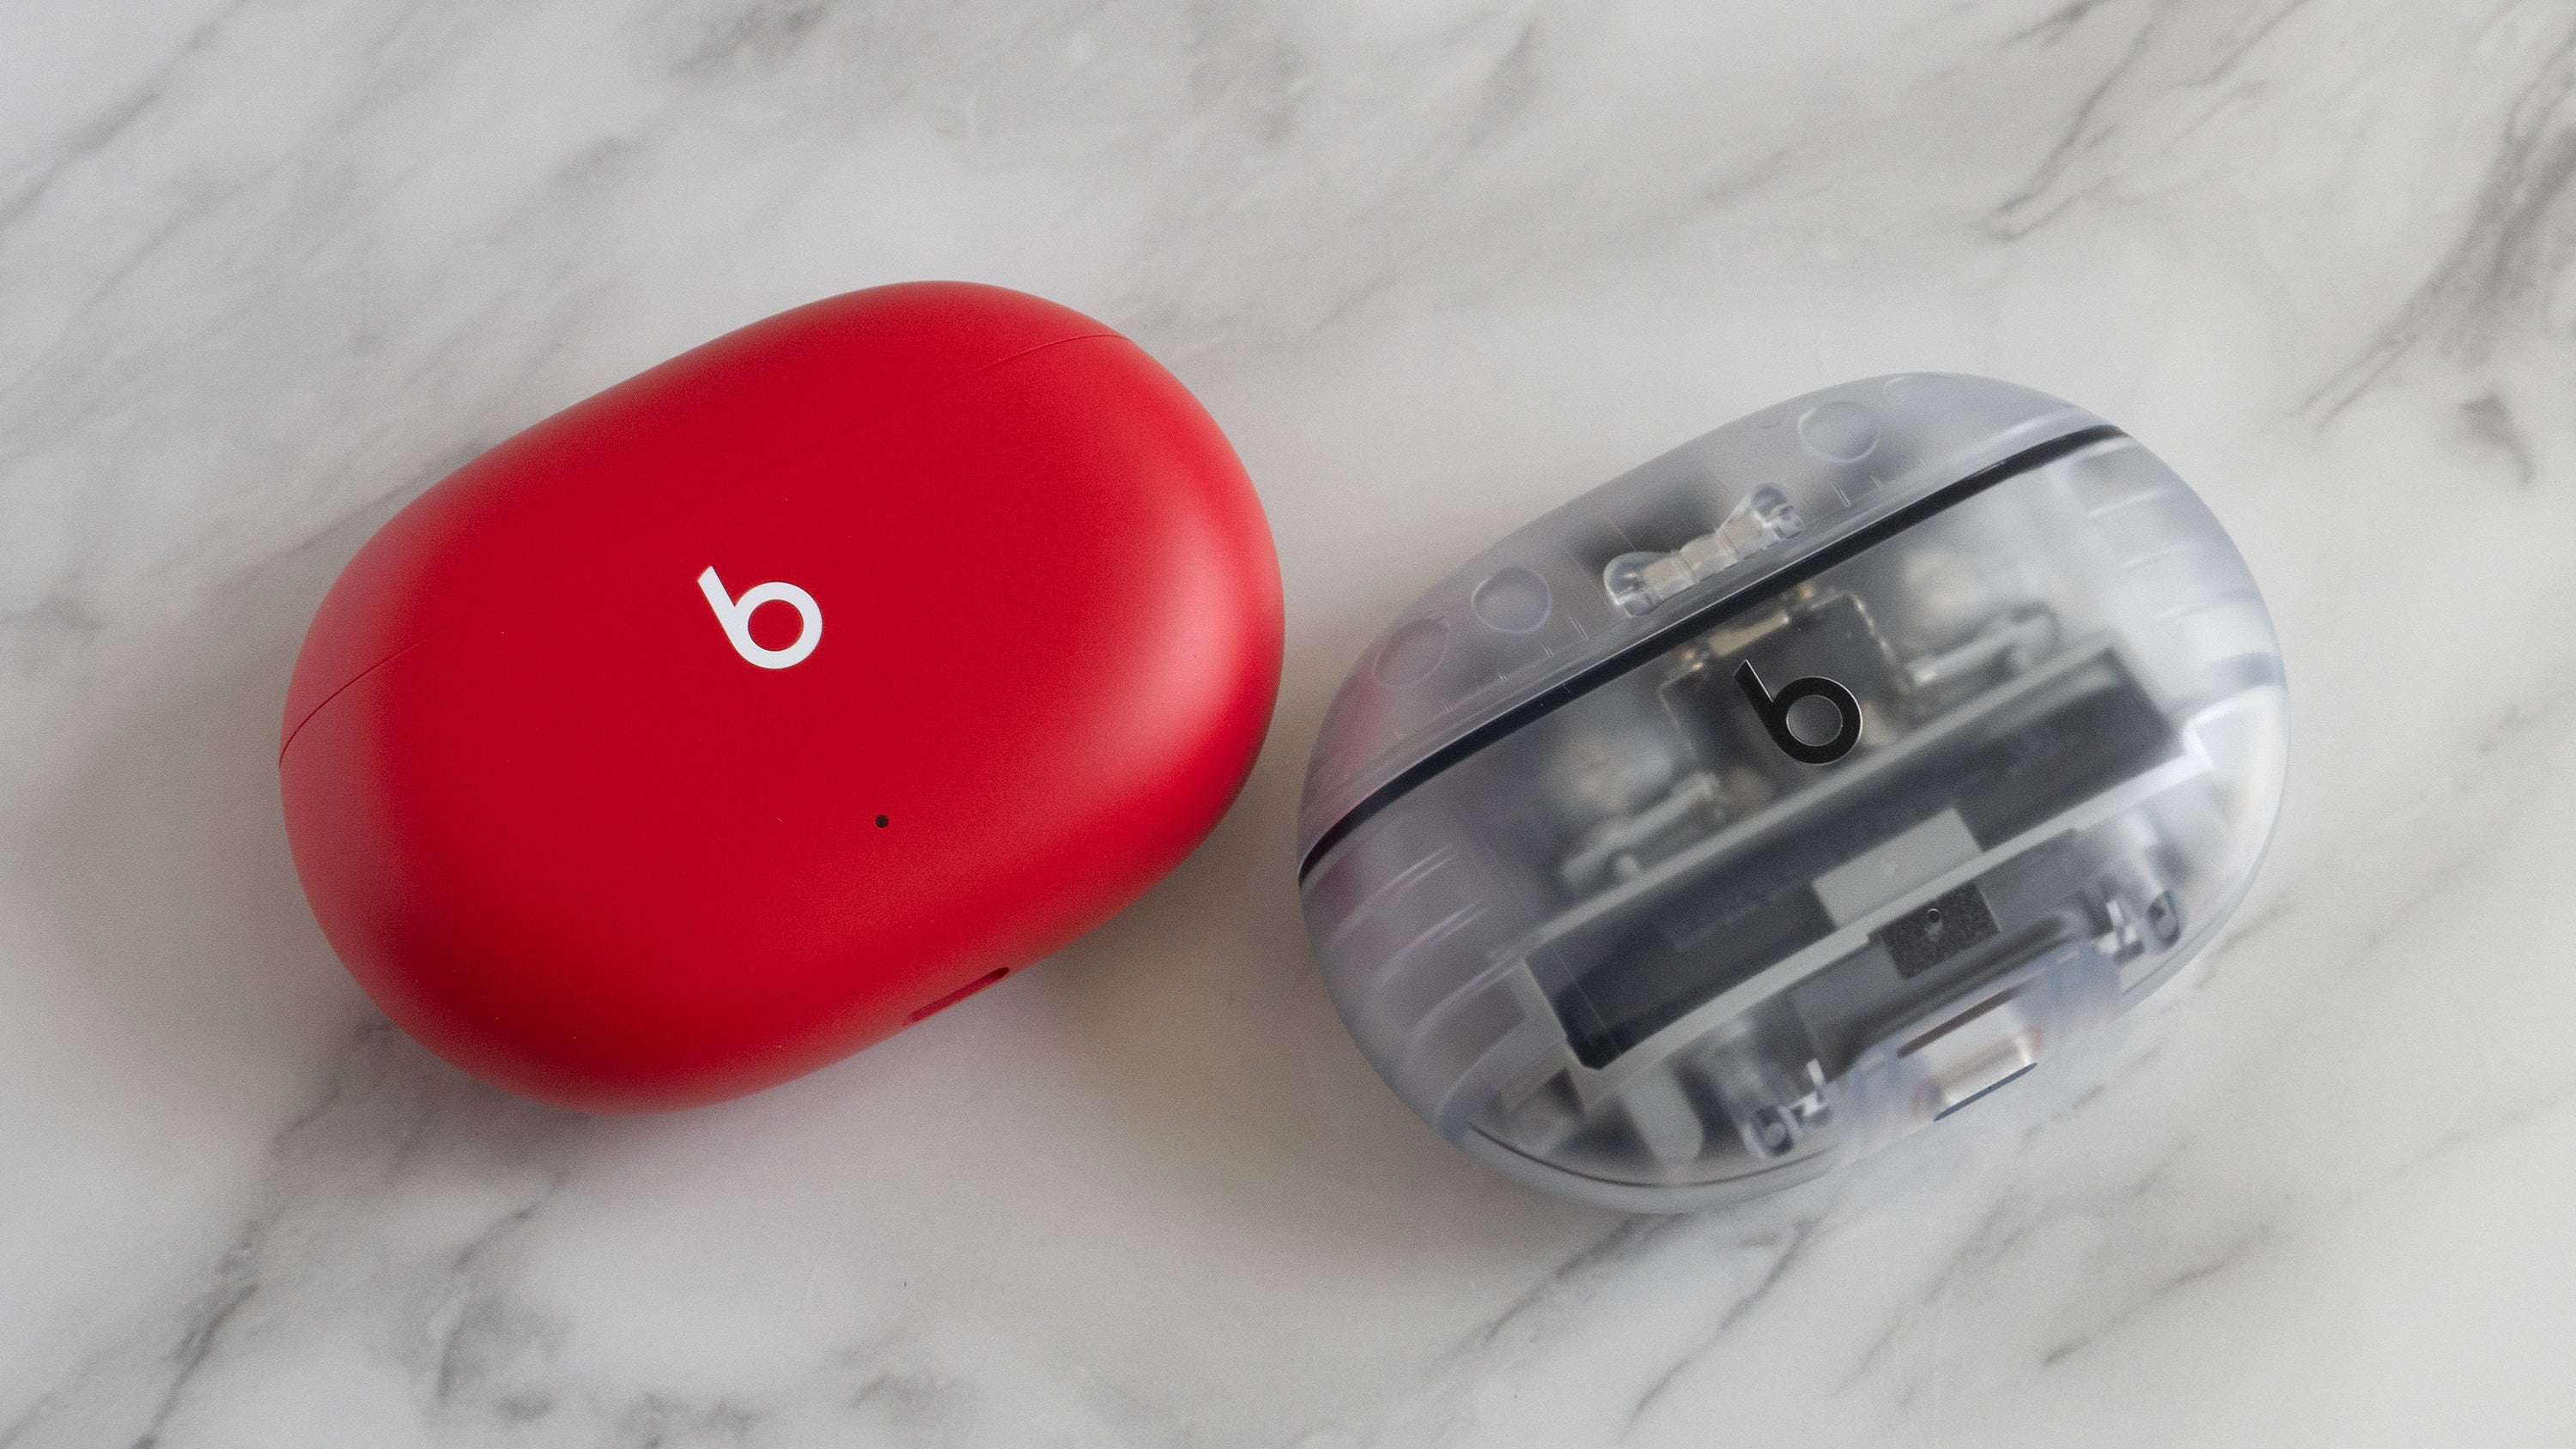 Aside from the new transparent colorway for the Beats Studio Buds + (right), the charging case is almost impossible to distinguish from the previous version (left). (Photo: Andrew Liszewski | Gizmodo)